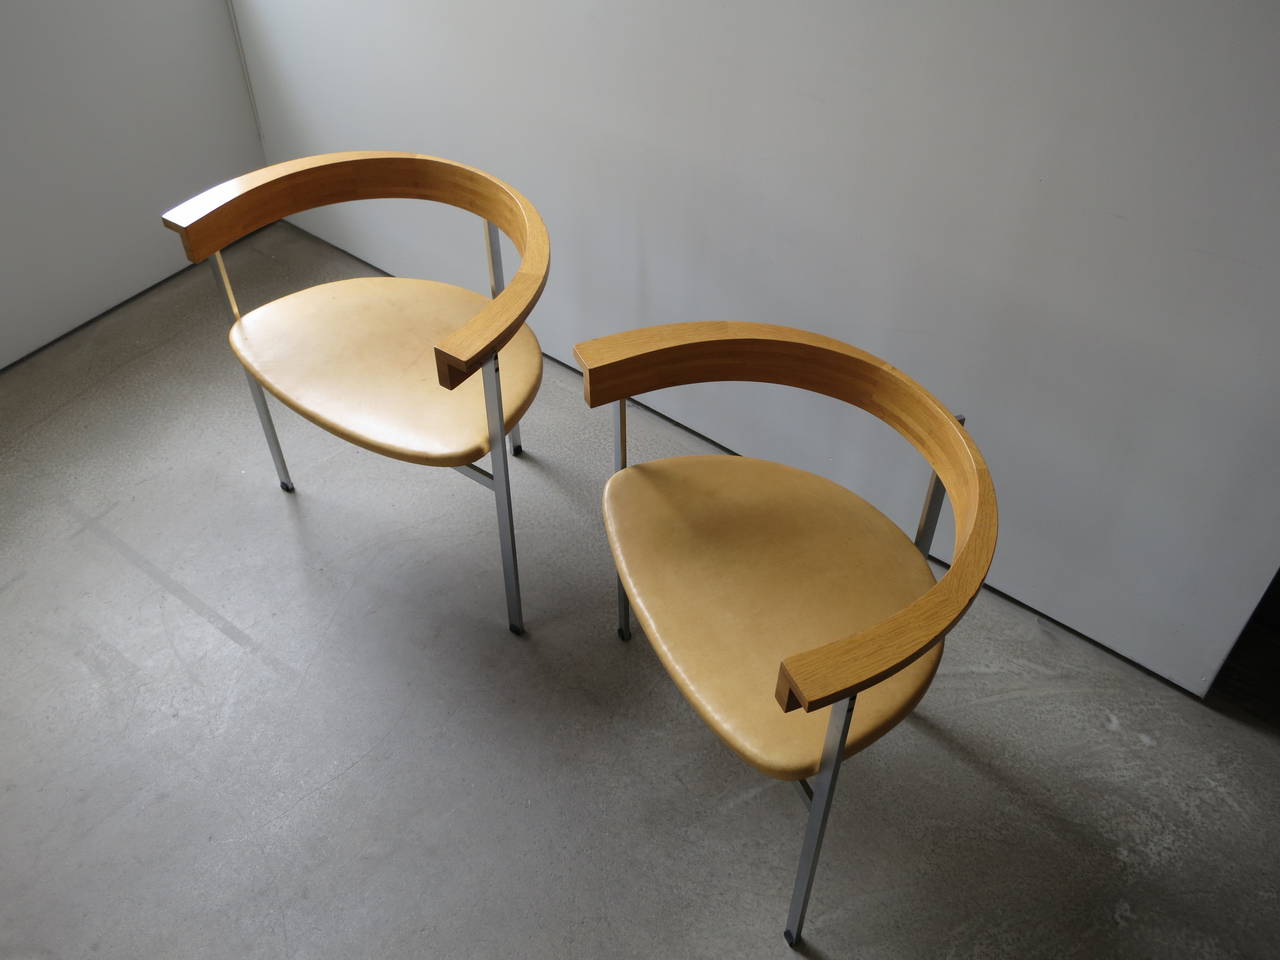 Danish Pair of PK-11 Armchairs by Poul Kjærholm, made by E. Kold Christensen For Sale